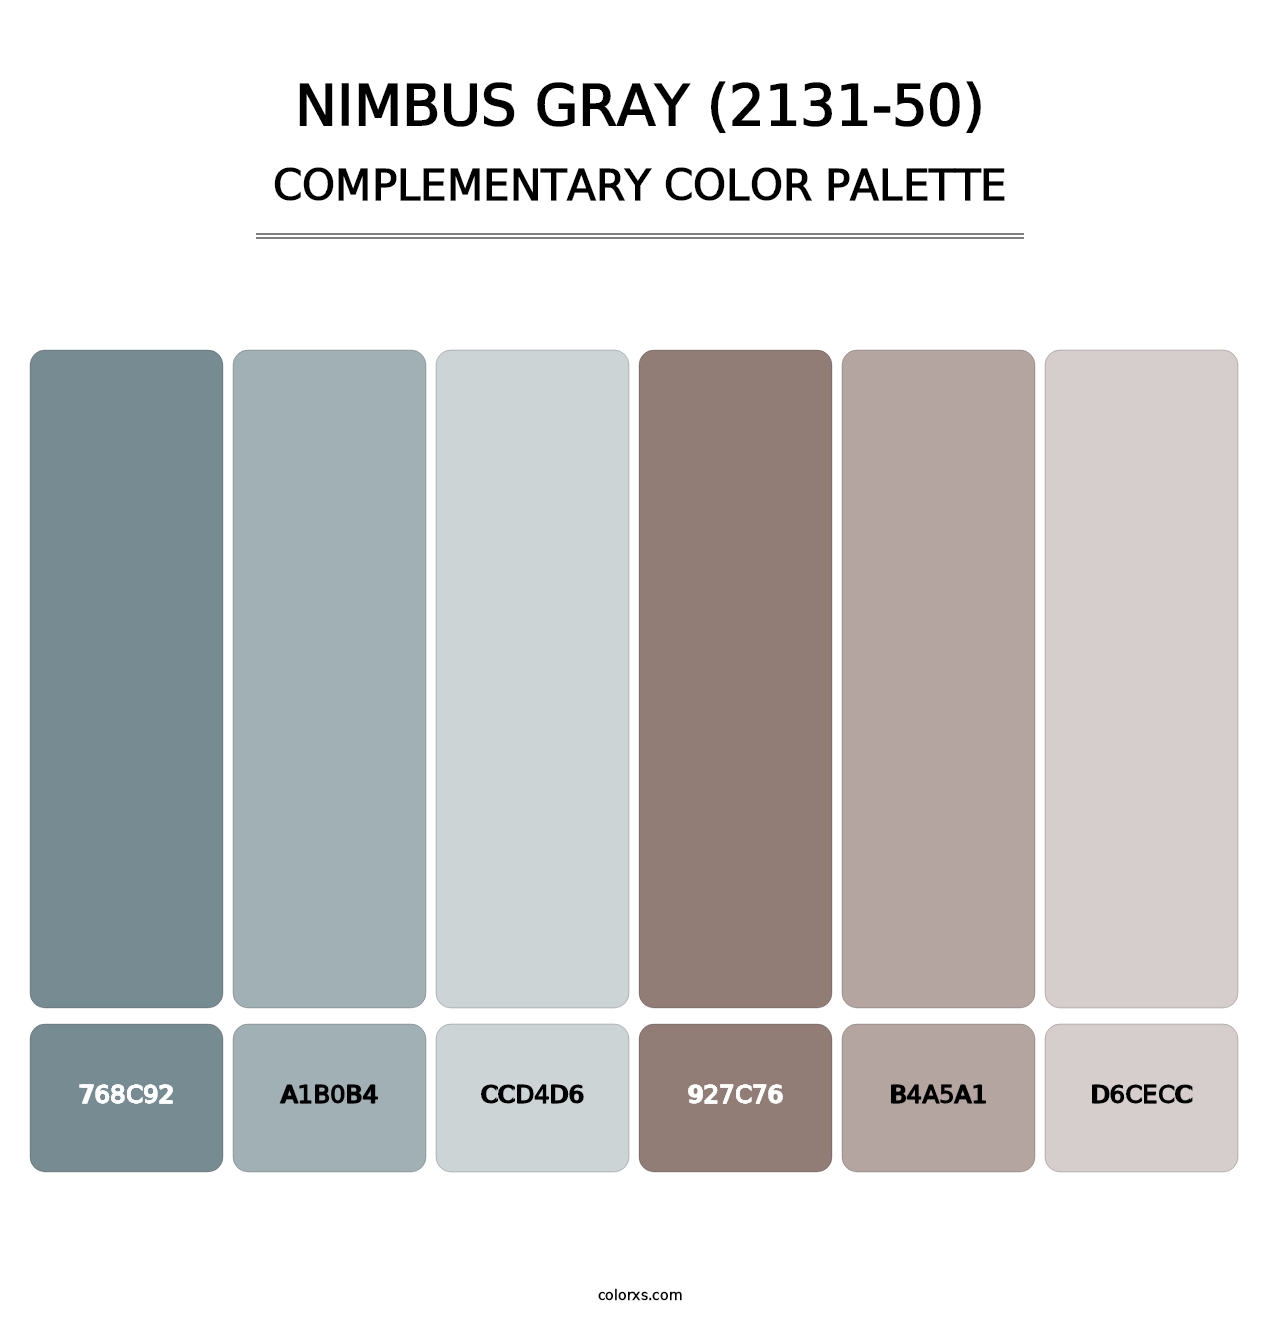 Nimbus Gray (2131-50) - Complementary Color Palette